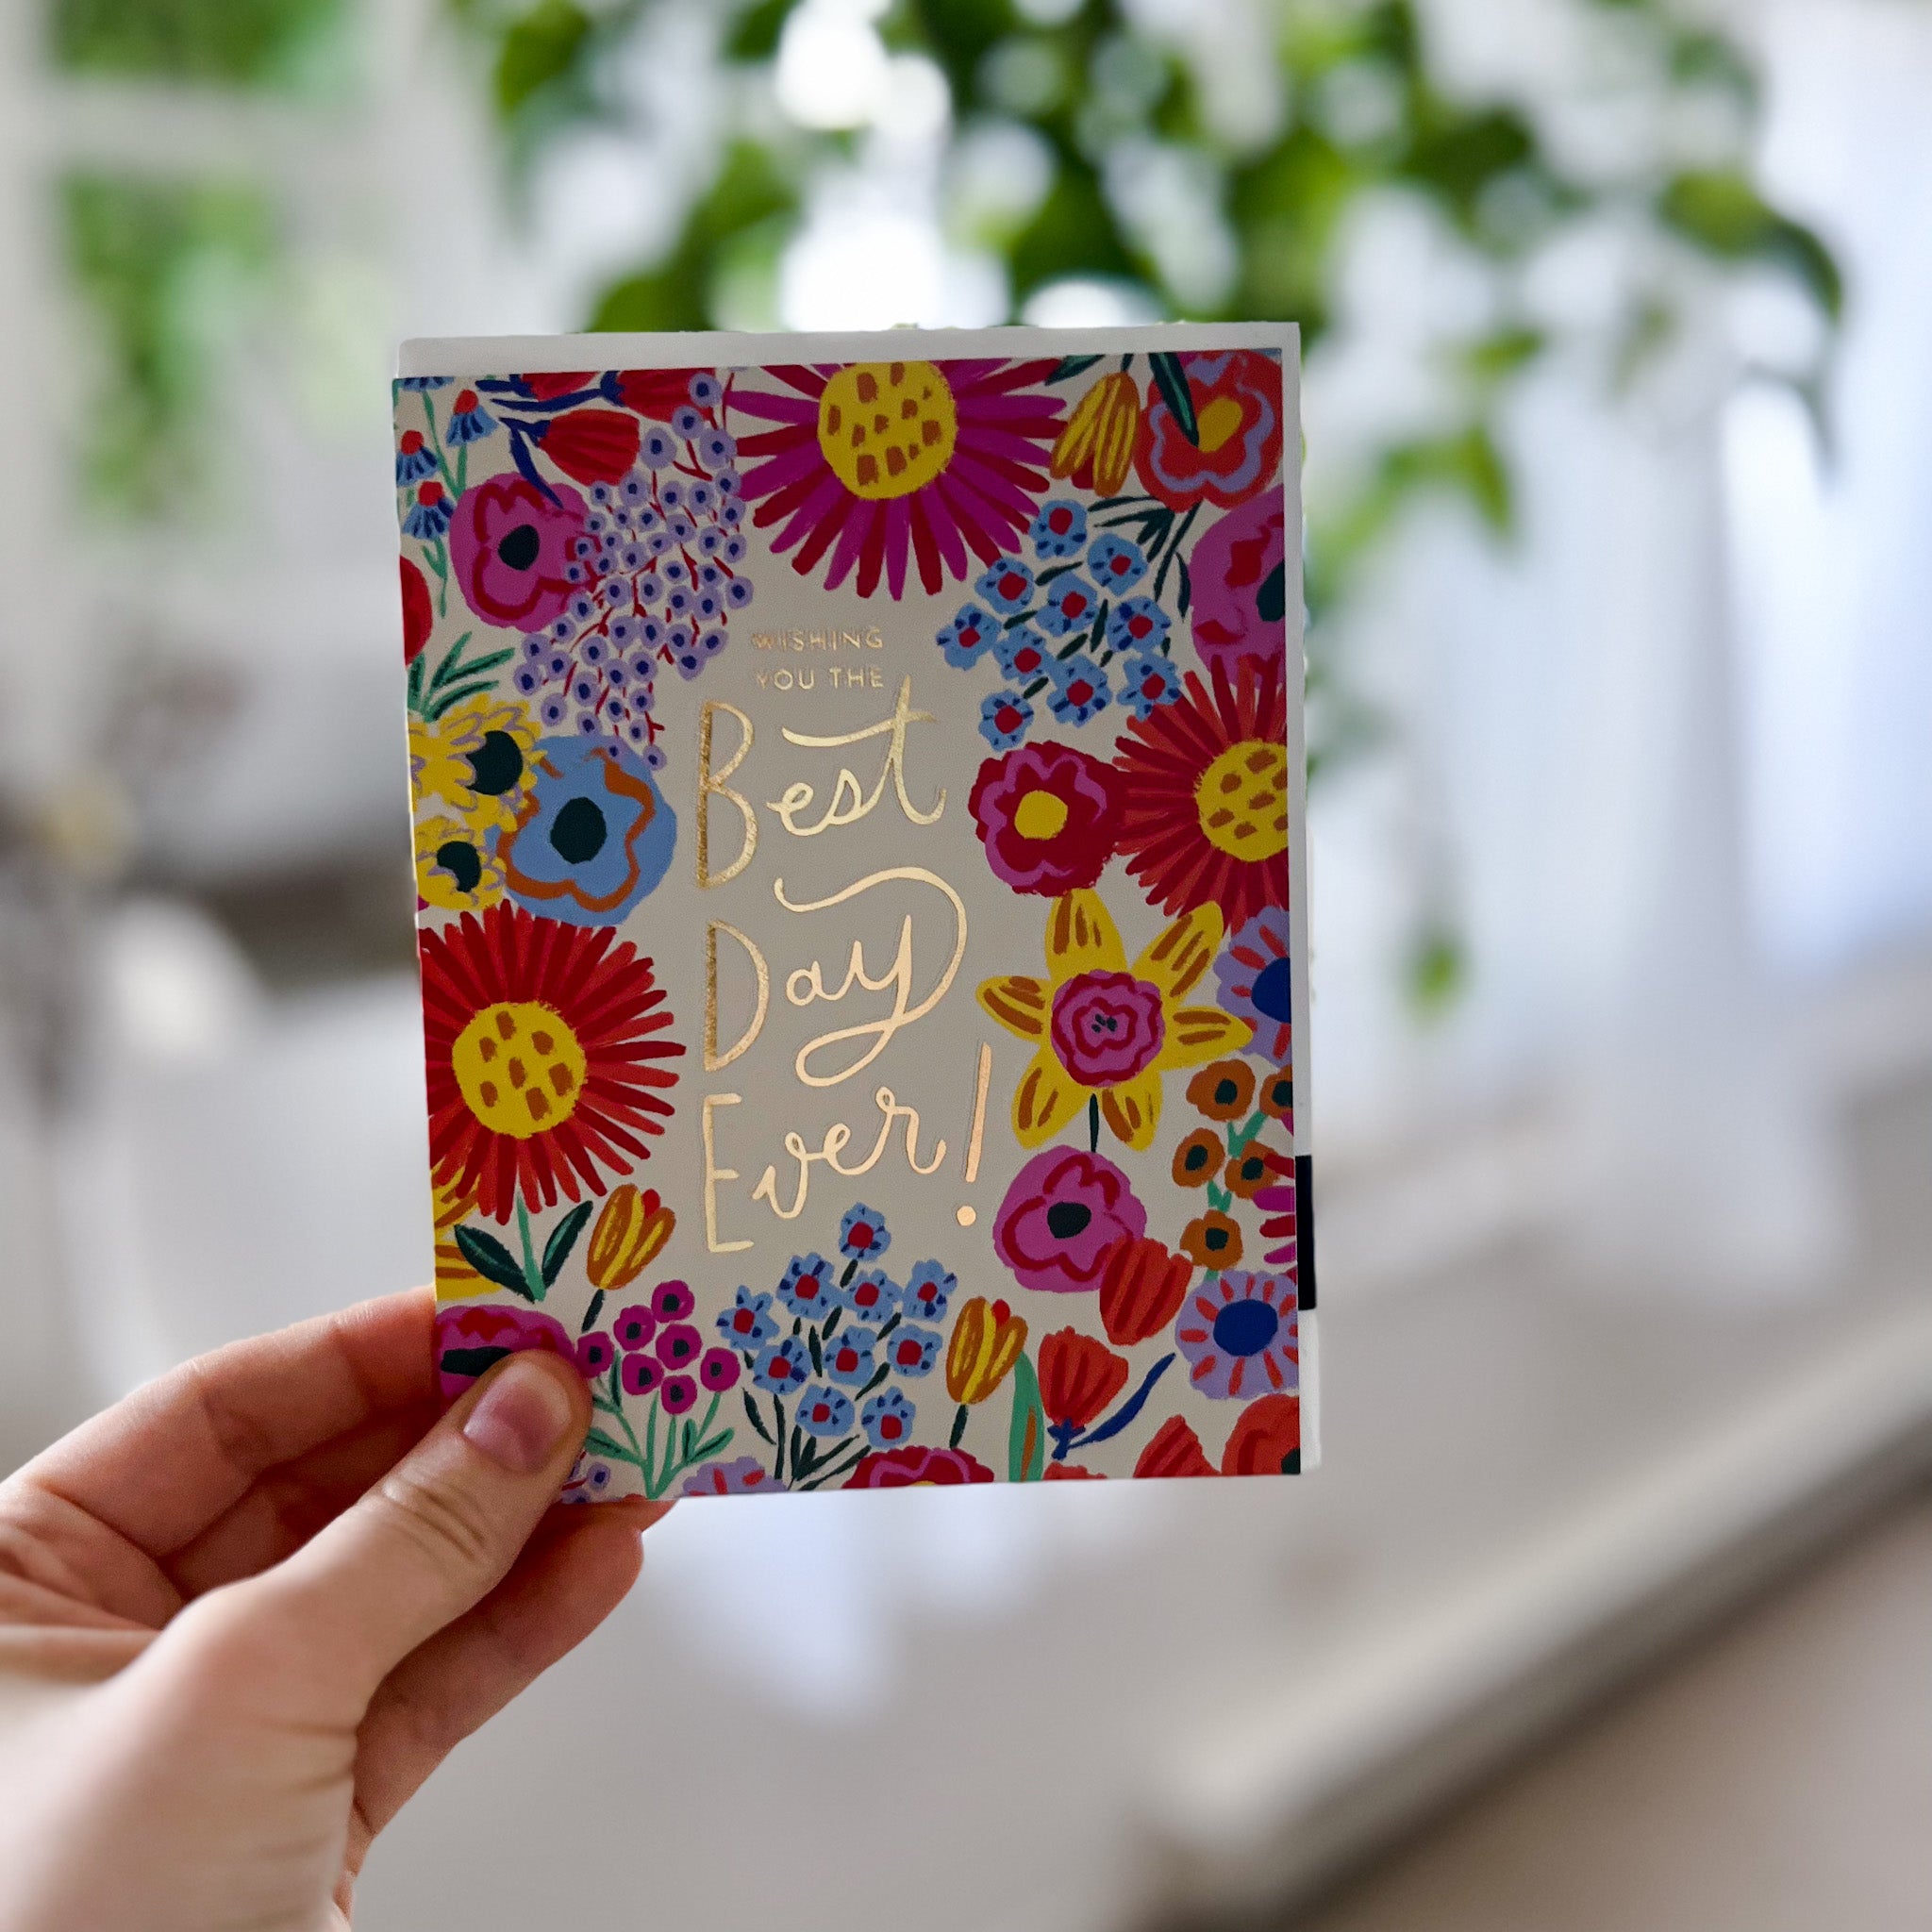 Caucasian hand holding brightly coloured floral greeting card with words that read "wishing you the best day ever!" in shiny gold lettering